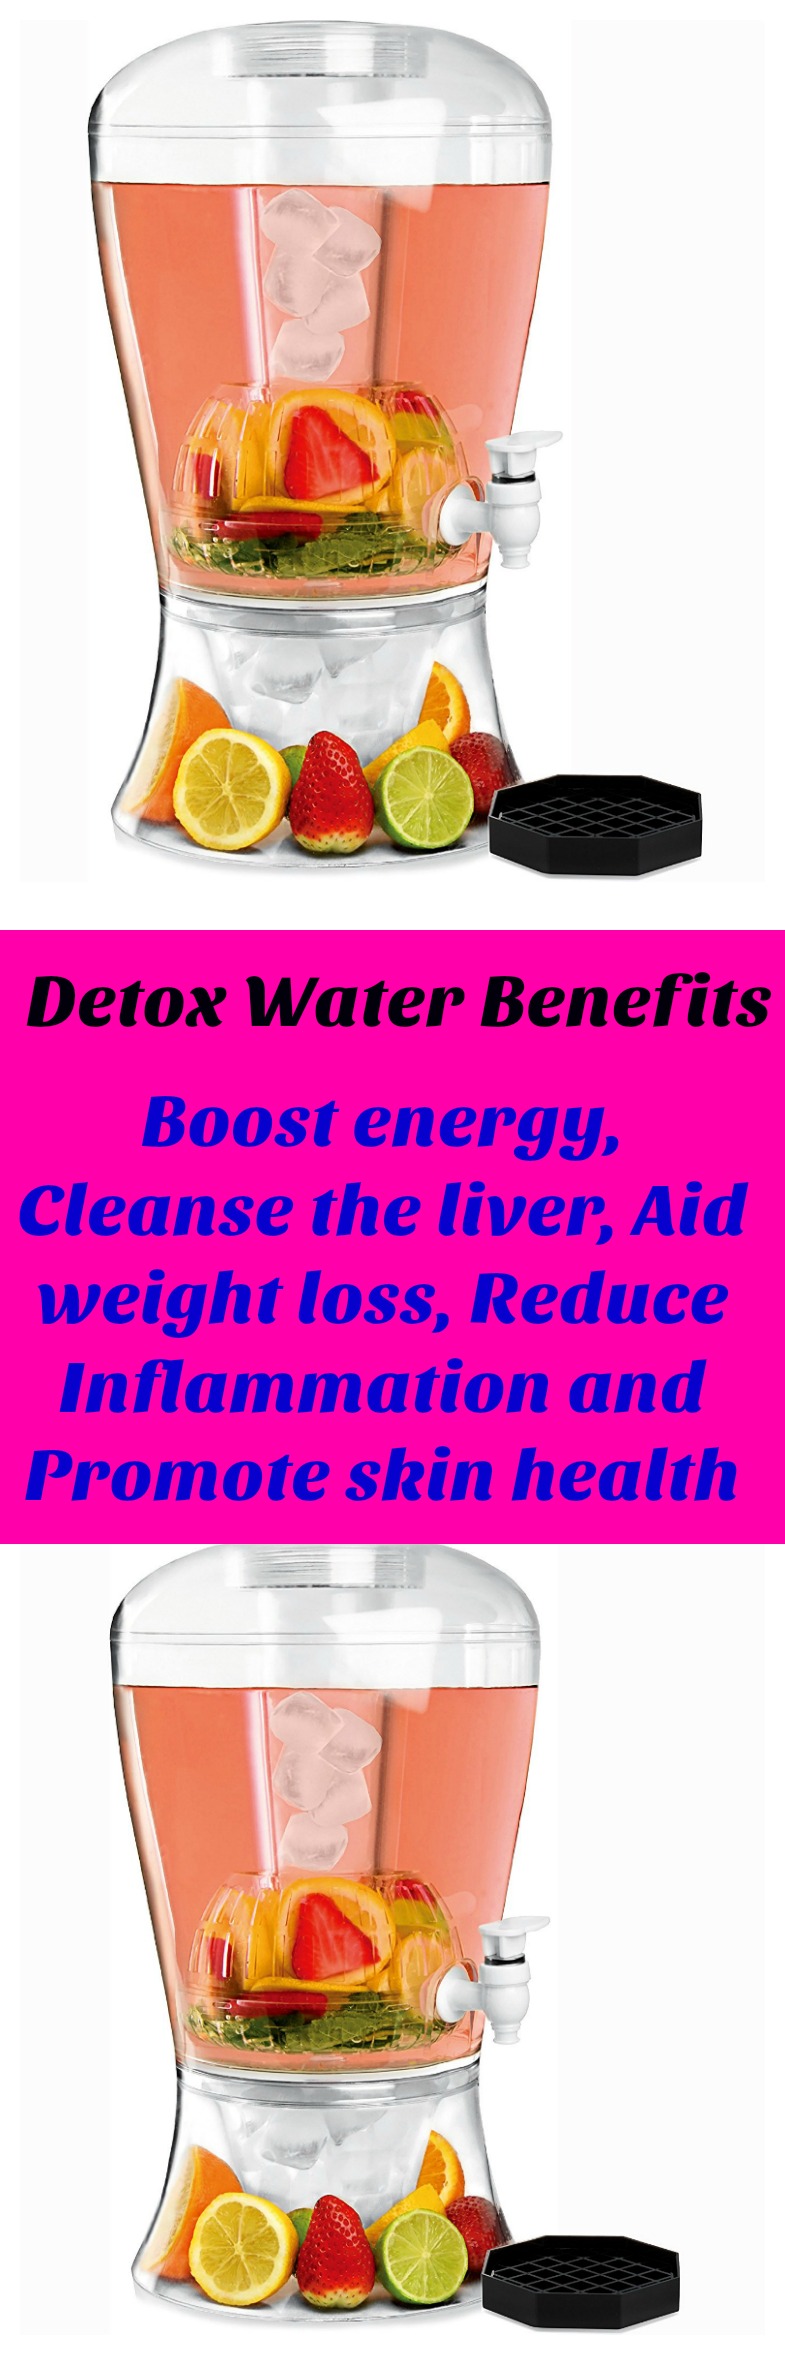 Cleanse your system, debloat your belly, reduce bloating, boost energy, supports metabolism. This detox drink will help with weightloss. 